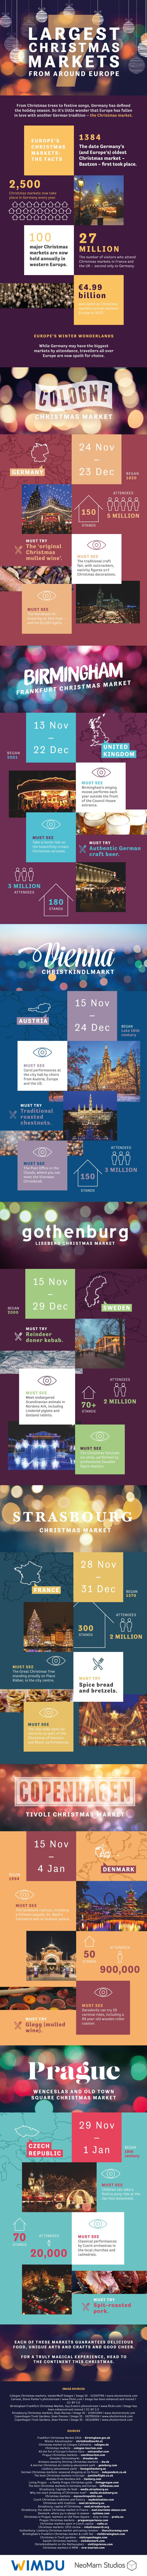 7 Largest Christmas Markets From Around Europe